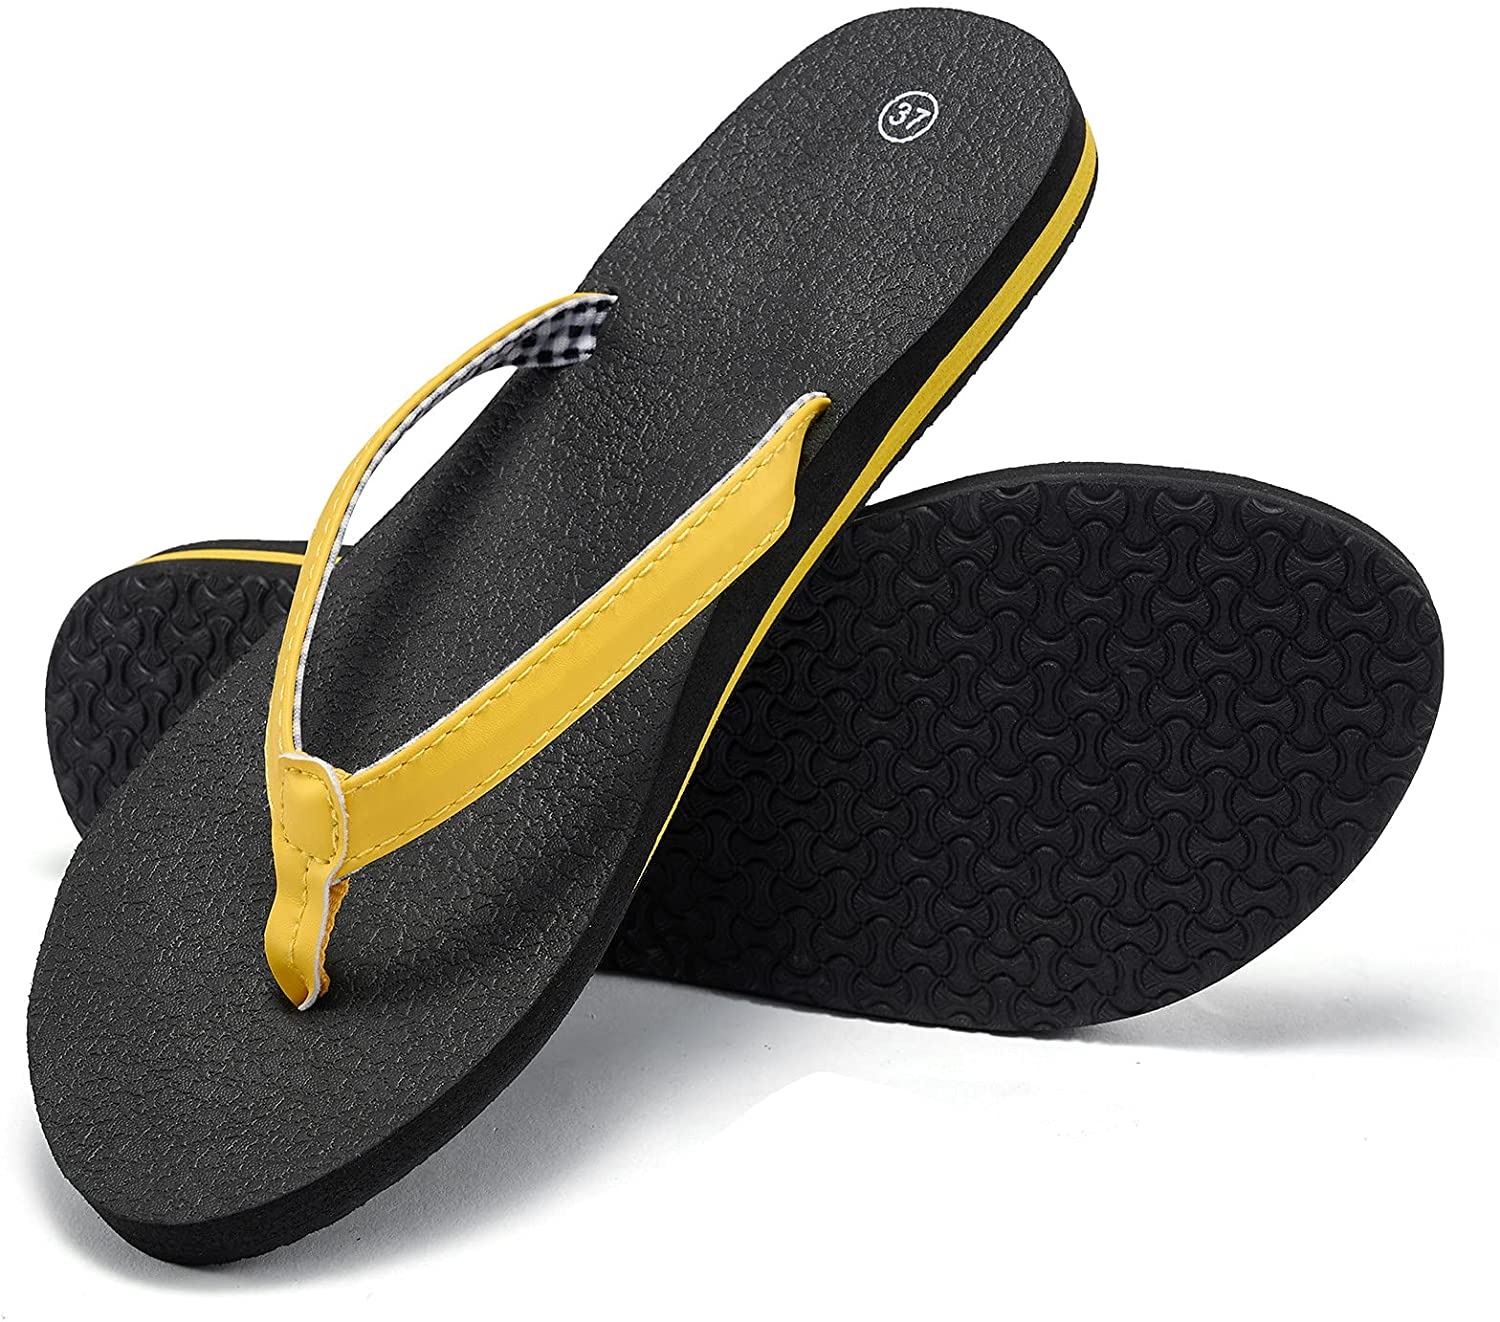 Akk Womens Flip Flops Sandals Yoga Foam Thong Sandals with Comfort Orthotic Arch Support Non Slip Soft Slides for Beach Summer Indoor Outdoor 